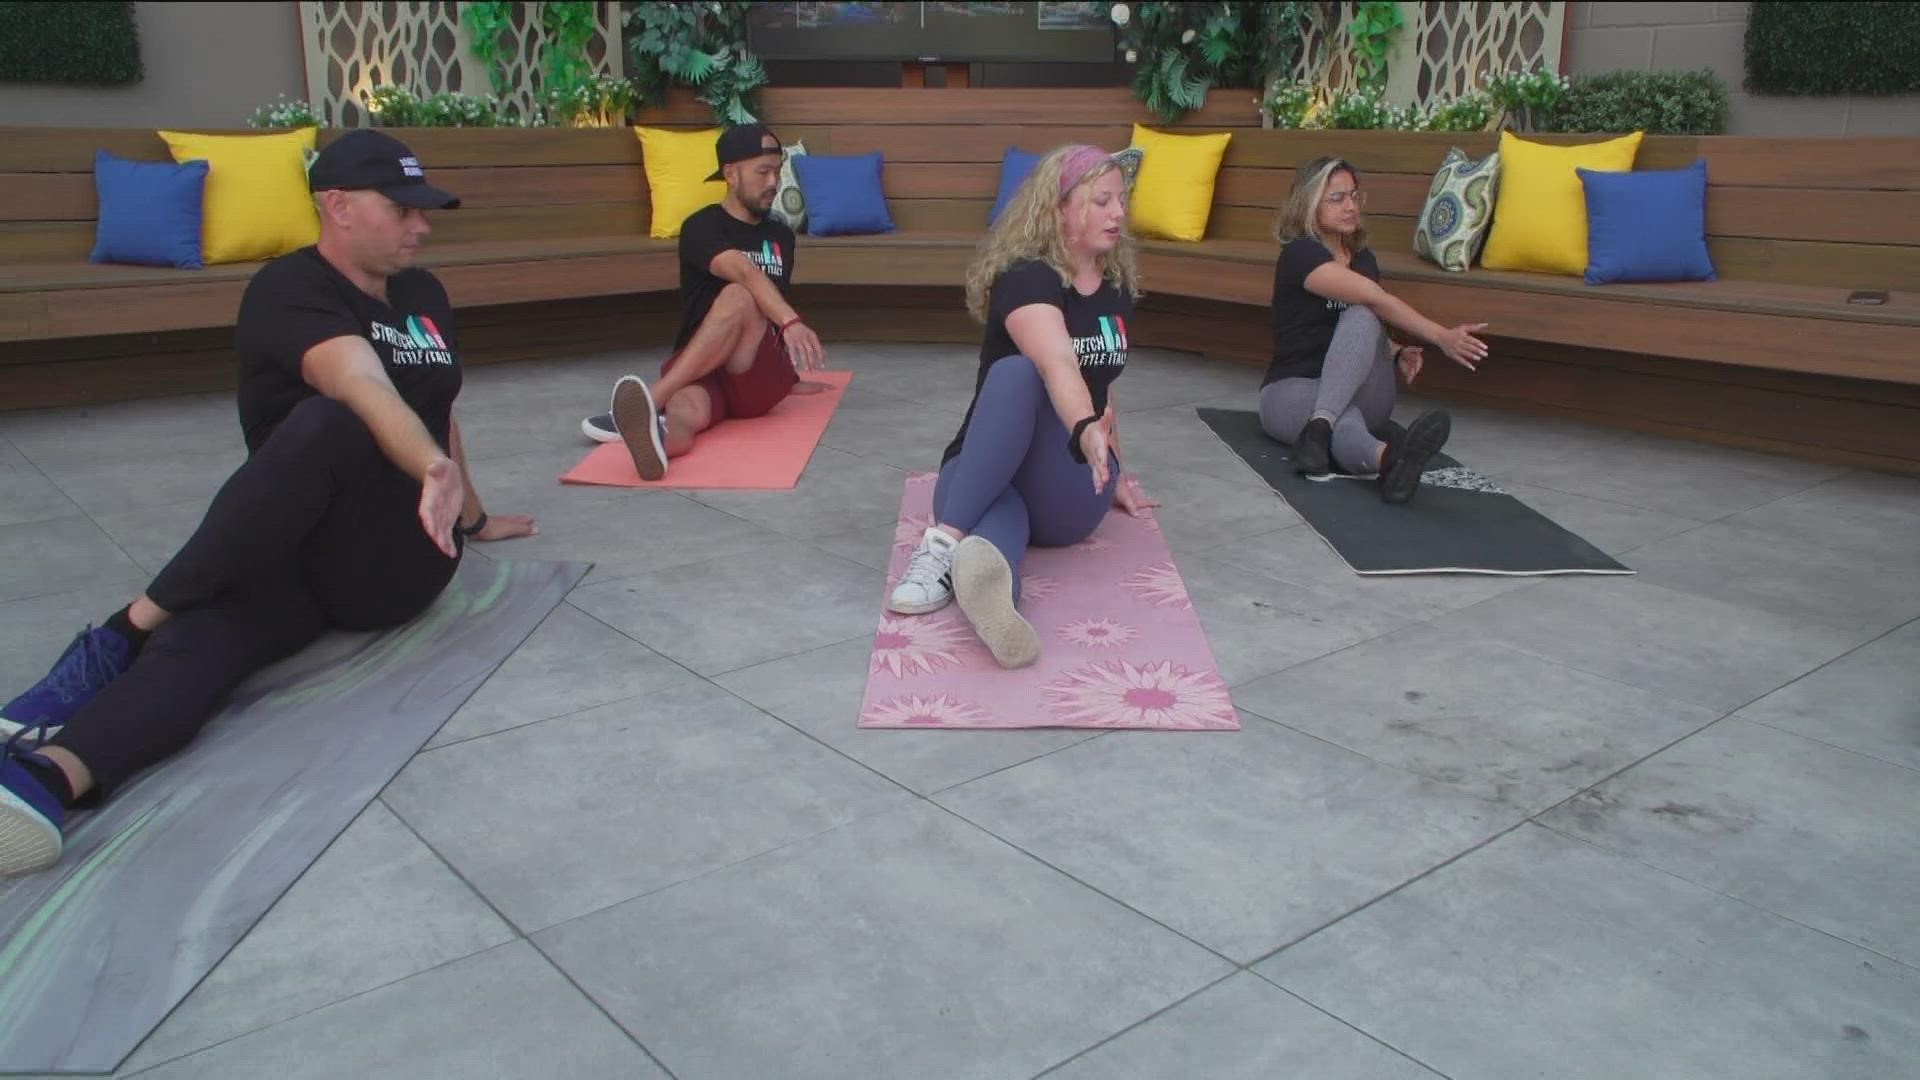 Flexologists from Stretchlab in Little Italy joined the CBS 8 Morning show and explained the benefits of stretching and demonstrated some stretches you can do.